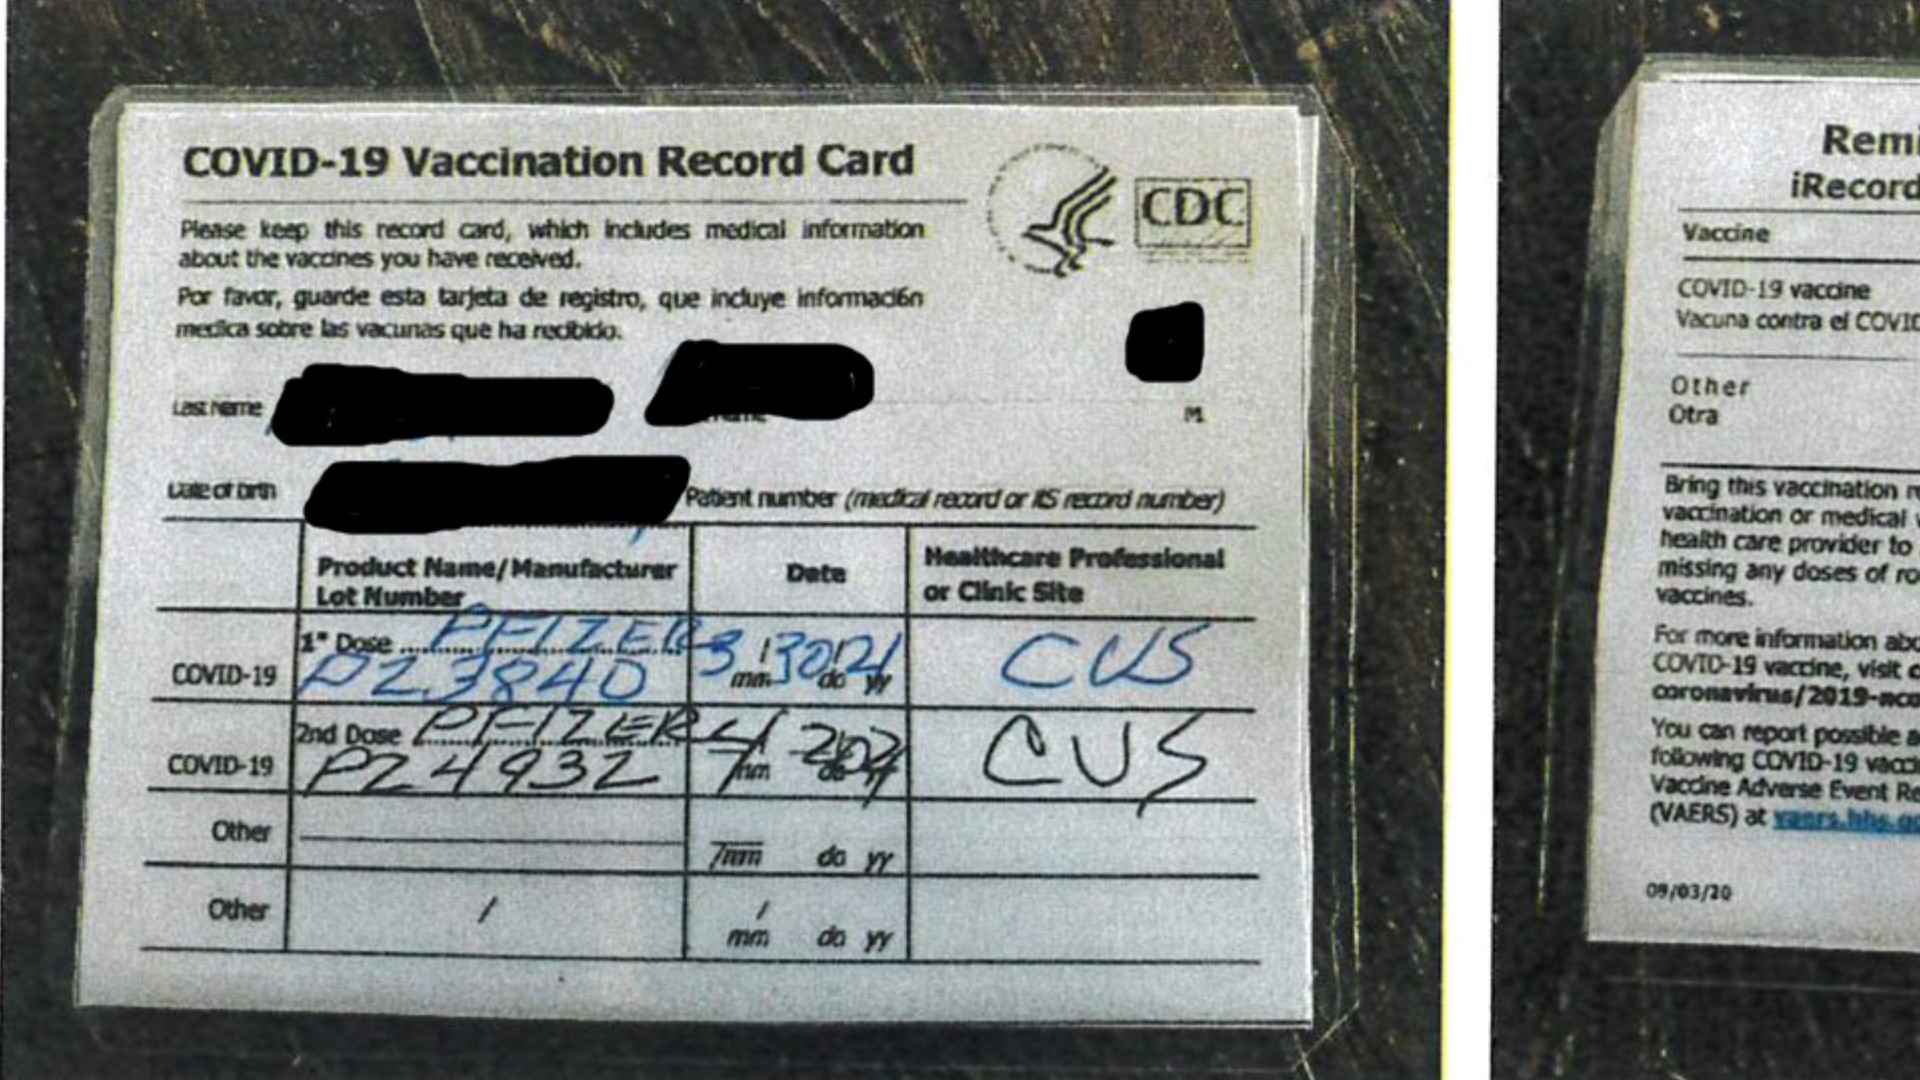 The ABC said undercover agents were able to buy the fake vaccination cards multiple times in April at the bar.